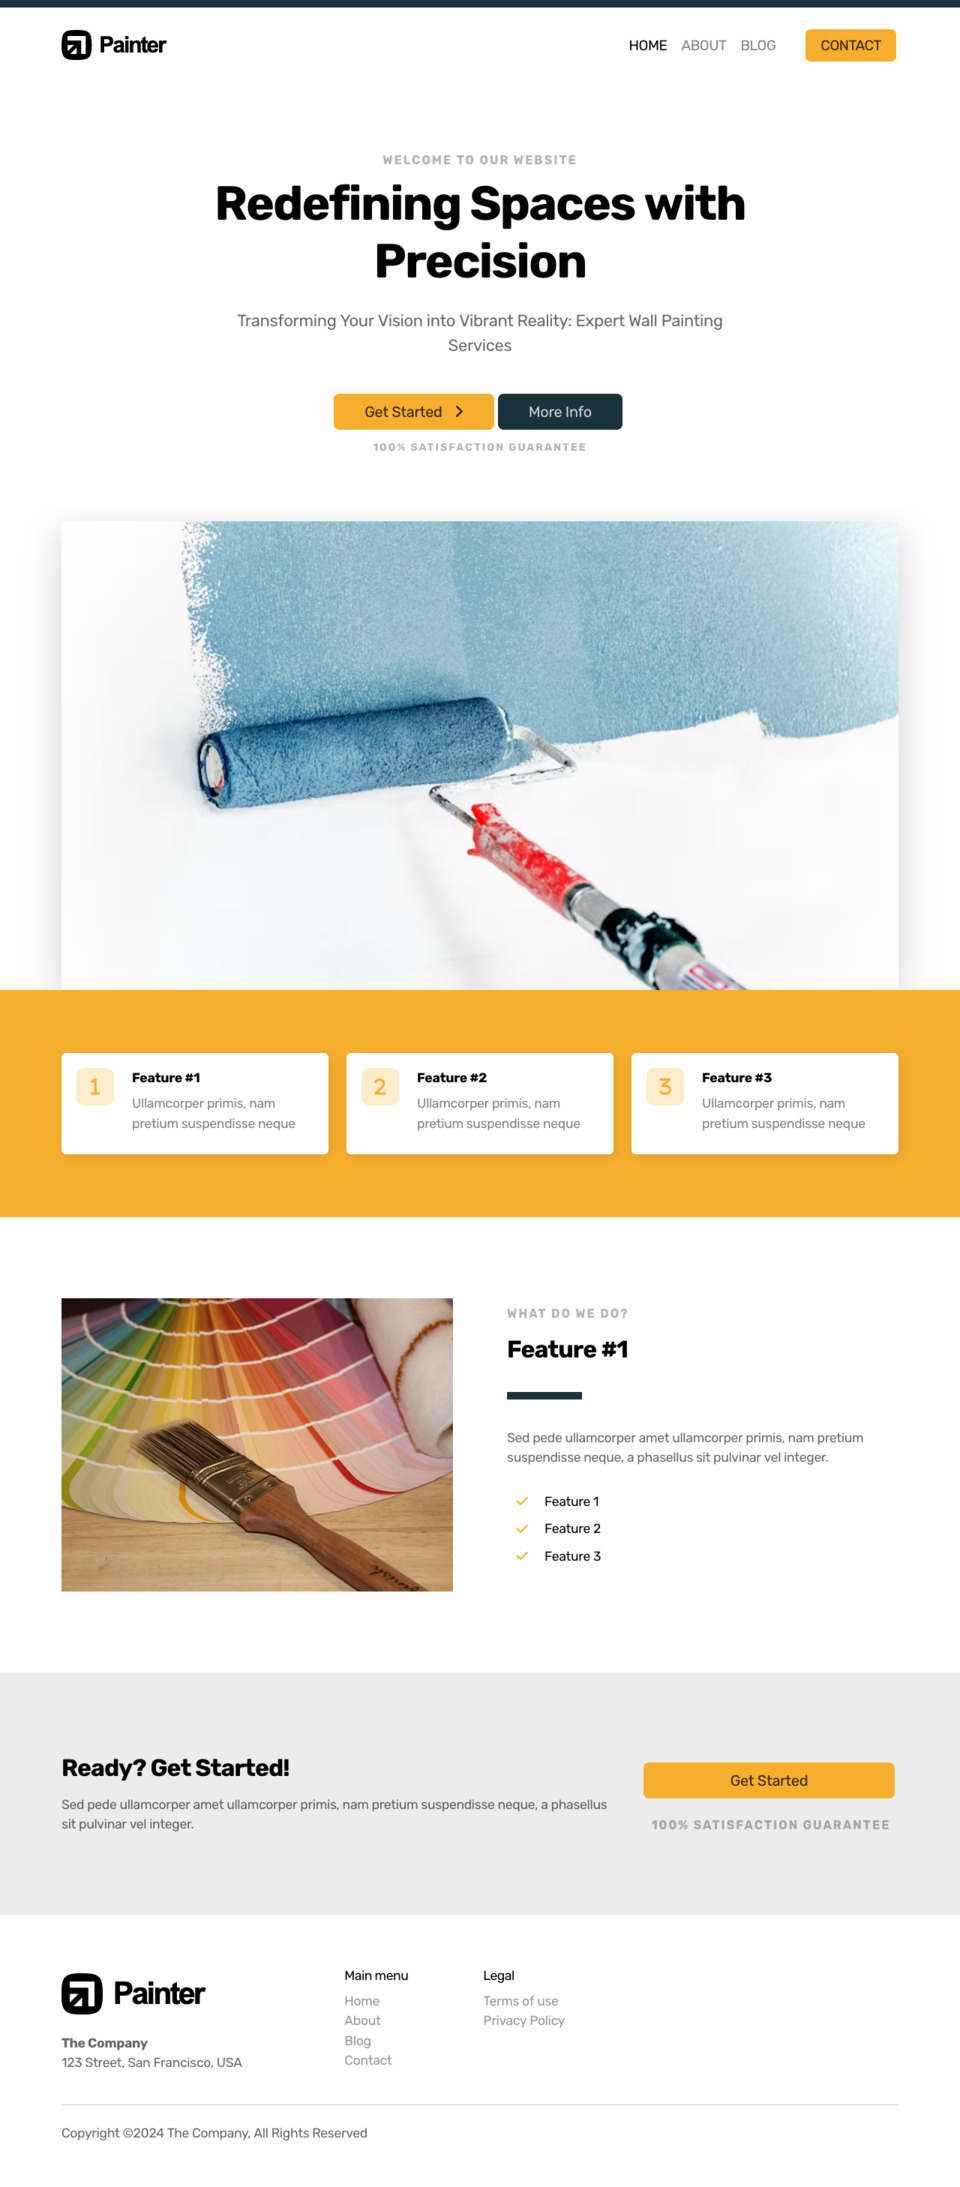 Painter Website Template - Ideal for house painting businesses, home renovation services, Handyman services, Painting contractors, and other related industries.